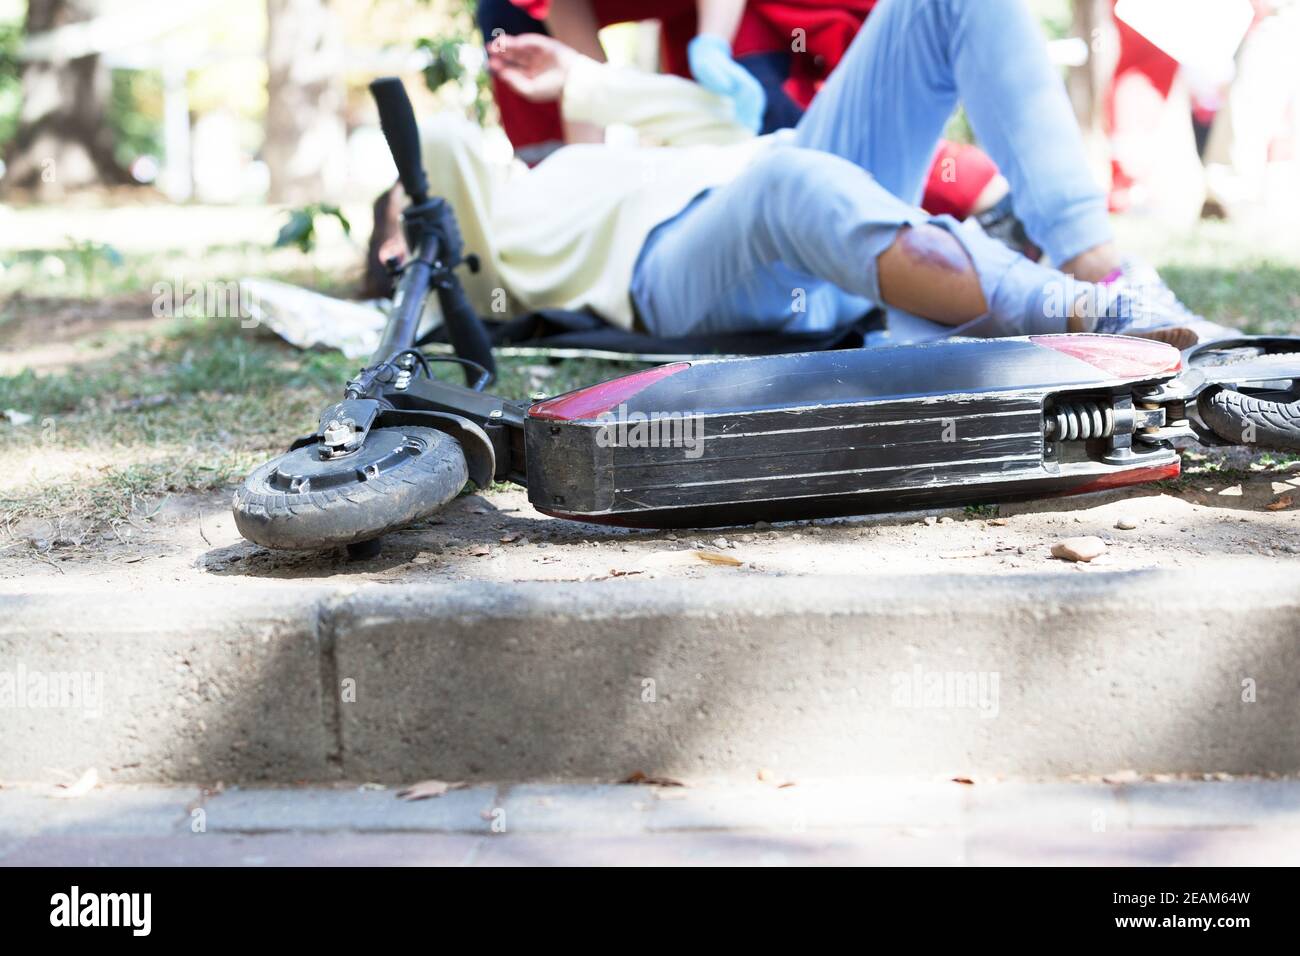 First aid for electric scooter rider injured in an accident Stock Photo